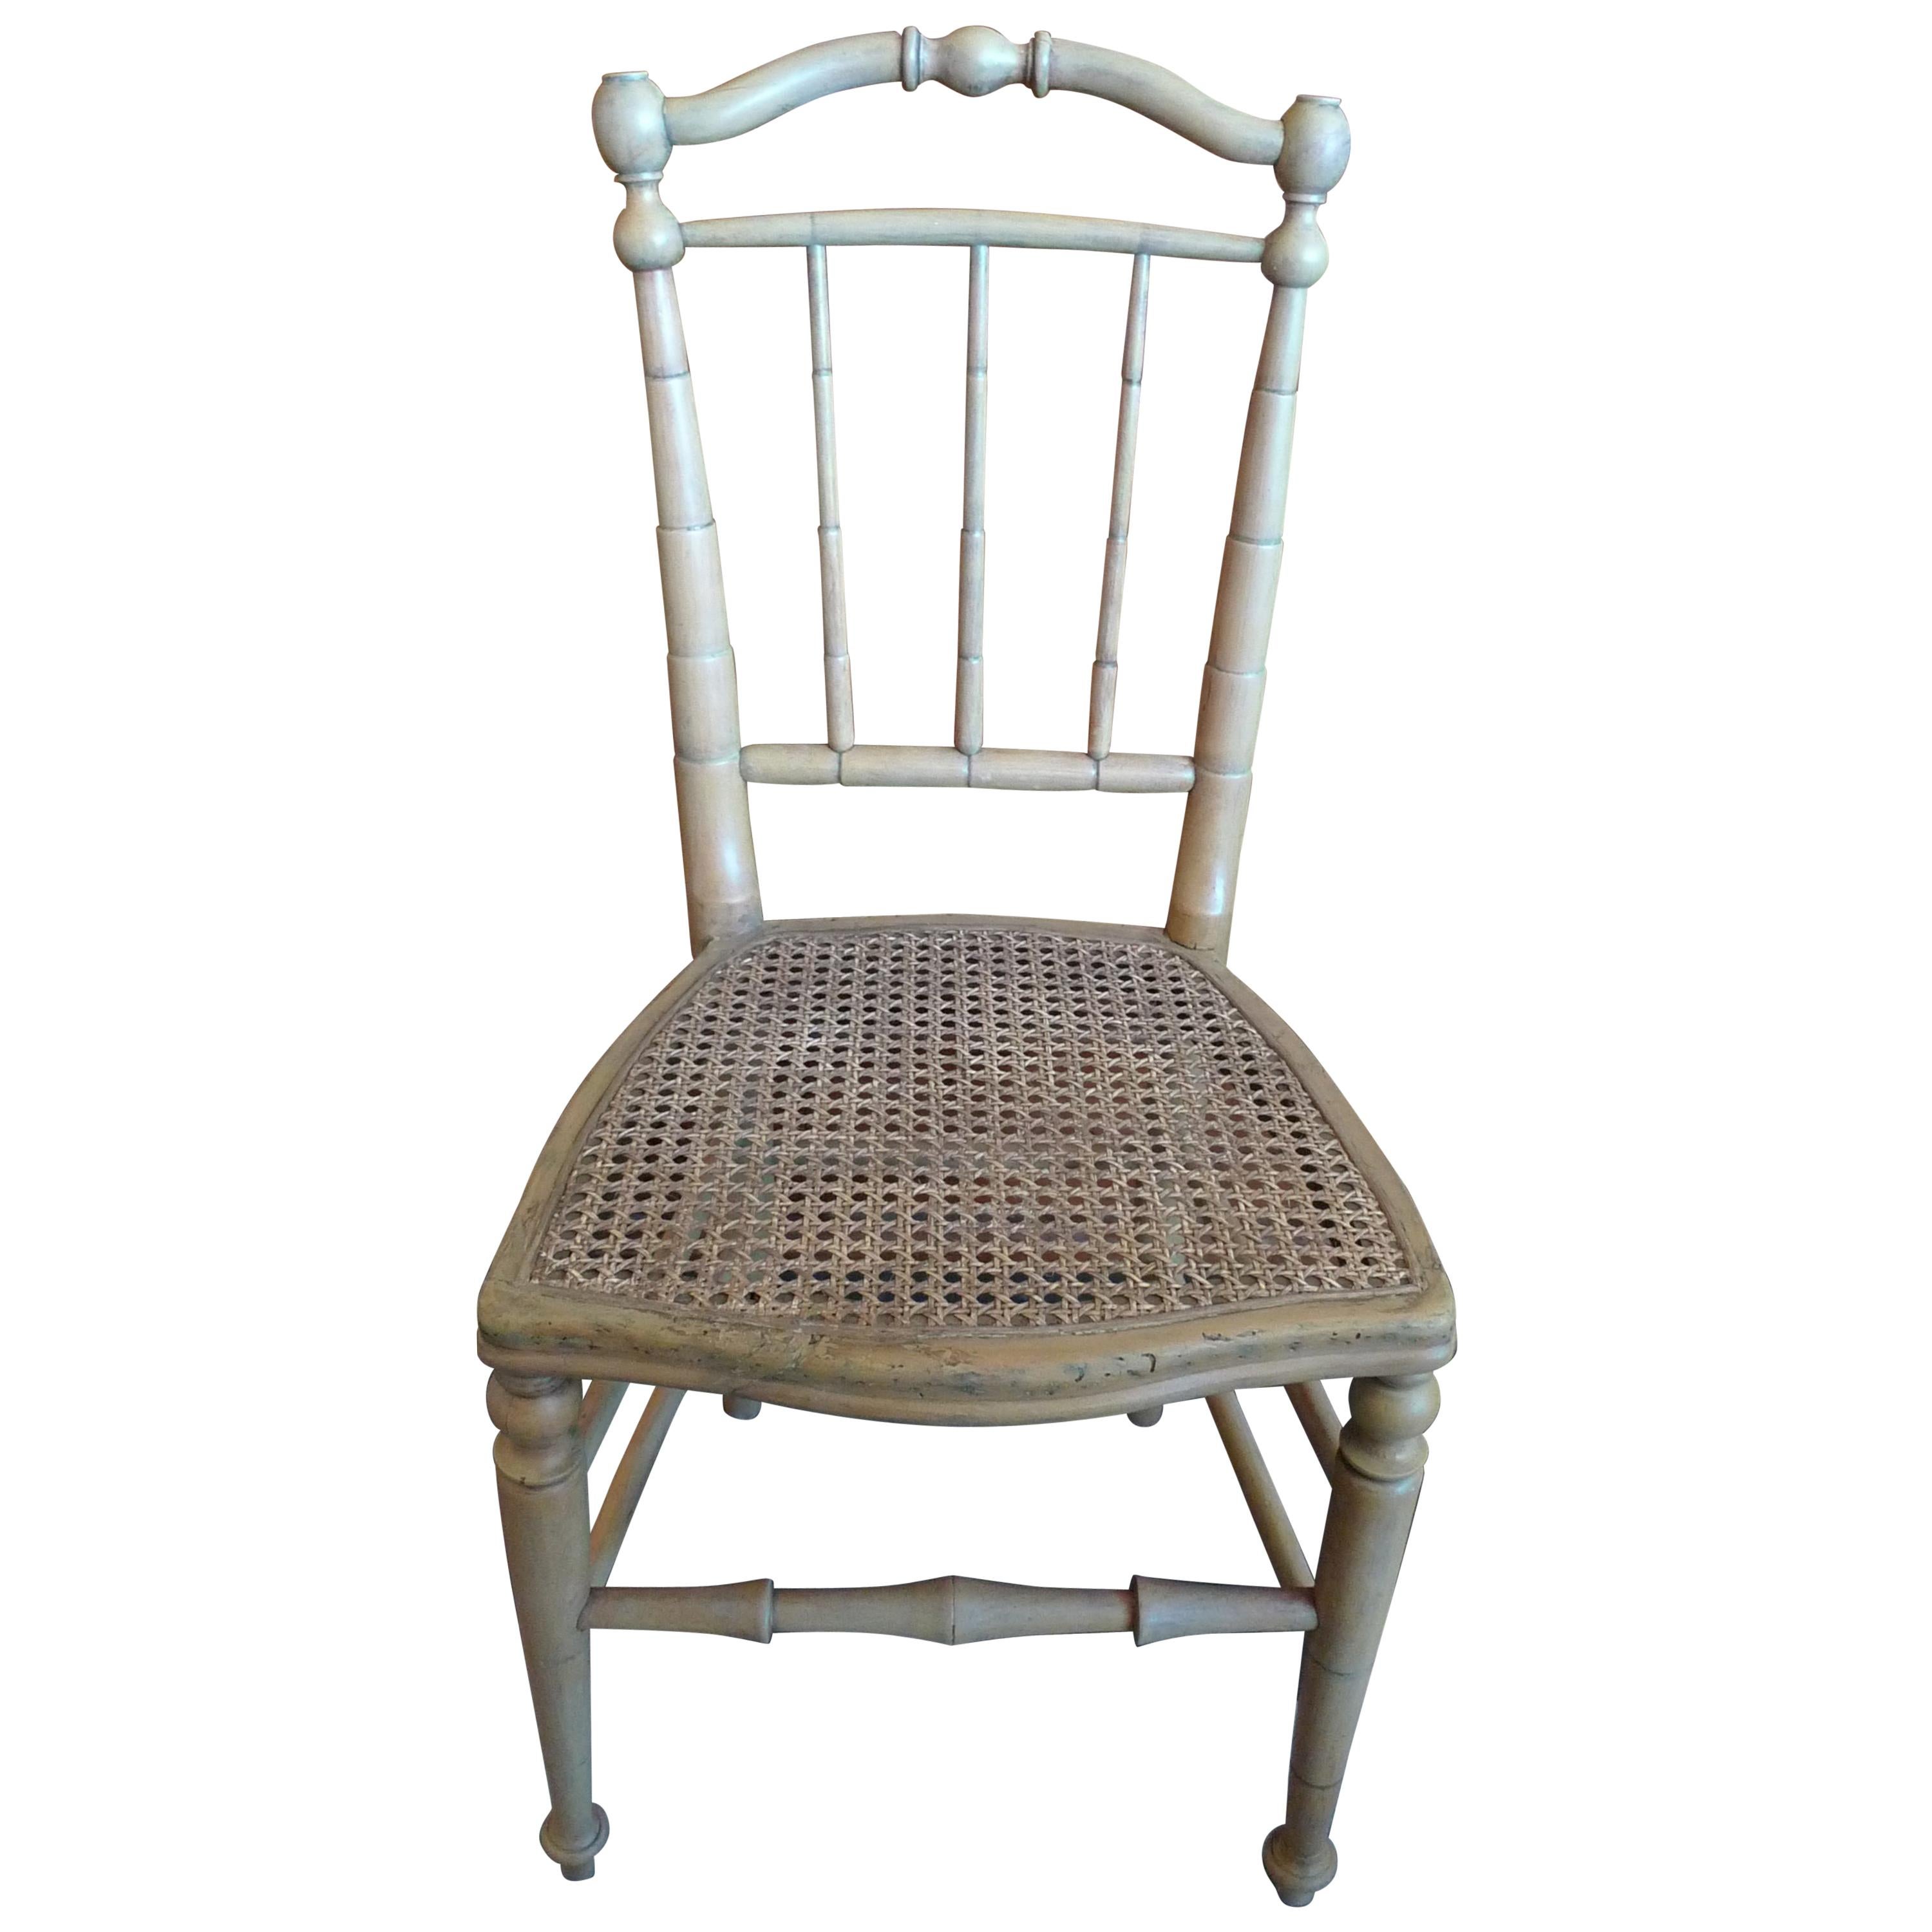 French 19th century bamboo and cane side chair.